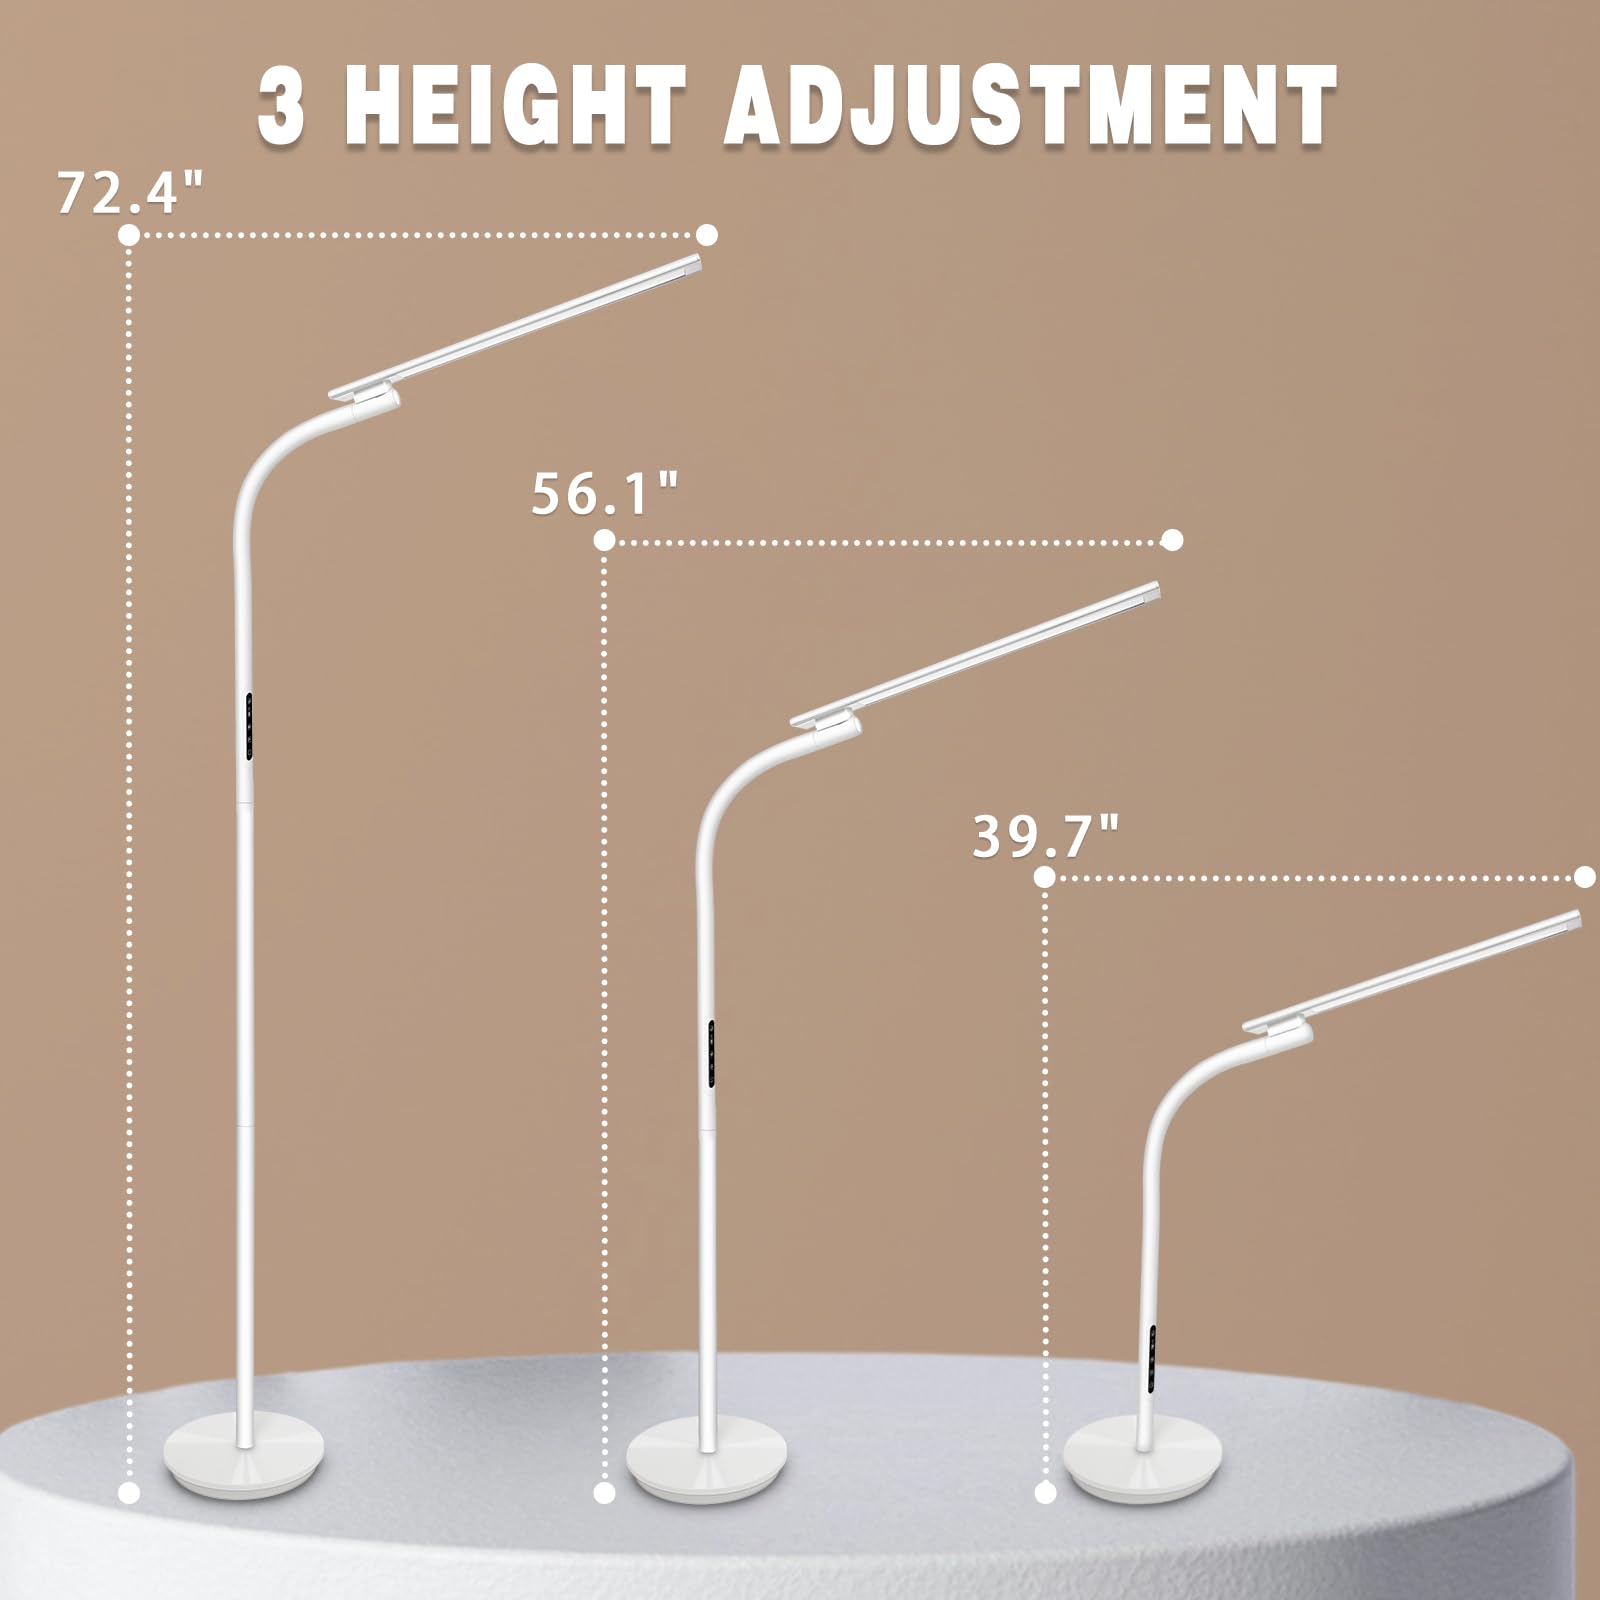 Fistone LED Floor Lamp, Floor Lamps with Stepless Adjustable 3000K-6000K Colors & Brightness, Remote & Touch Control Reading Floor Lamps, Adjustable Gooseneck Standing Floor Lamp for Bedroom Office